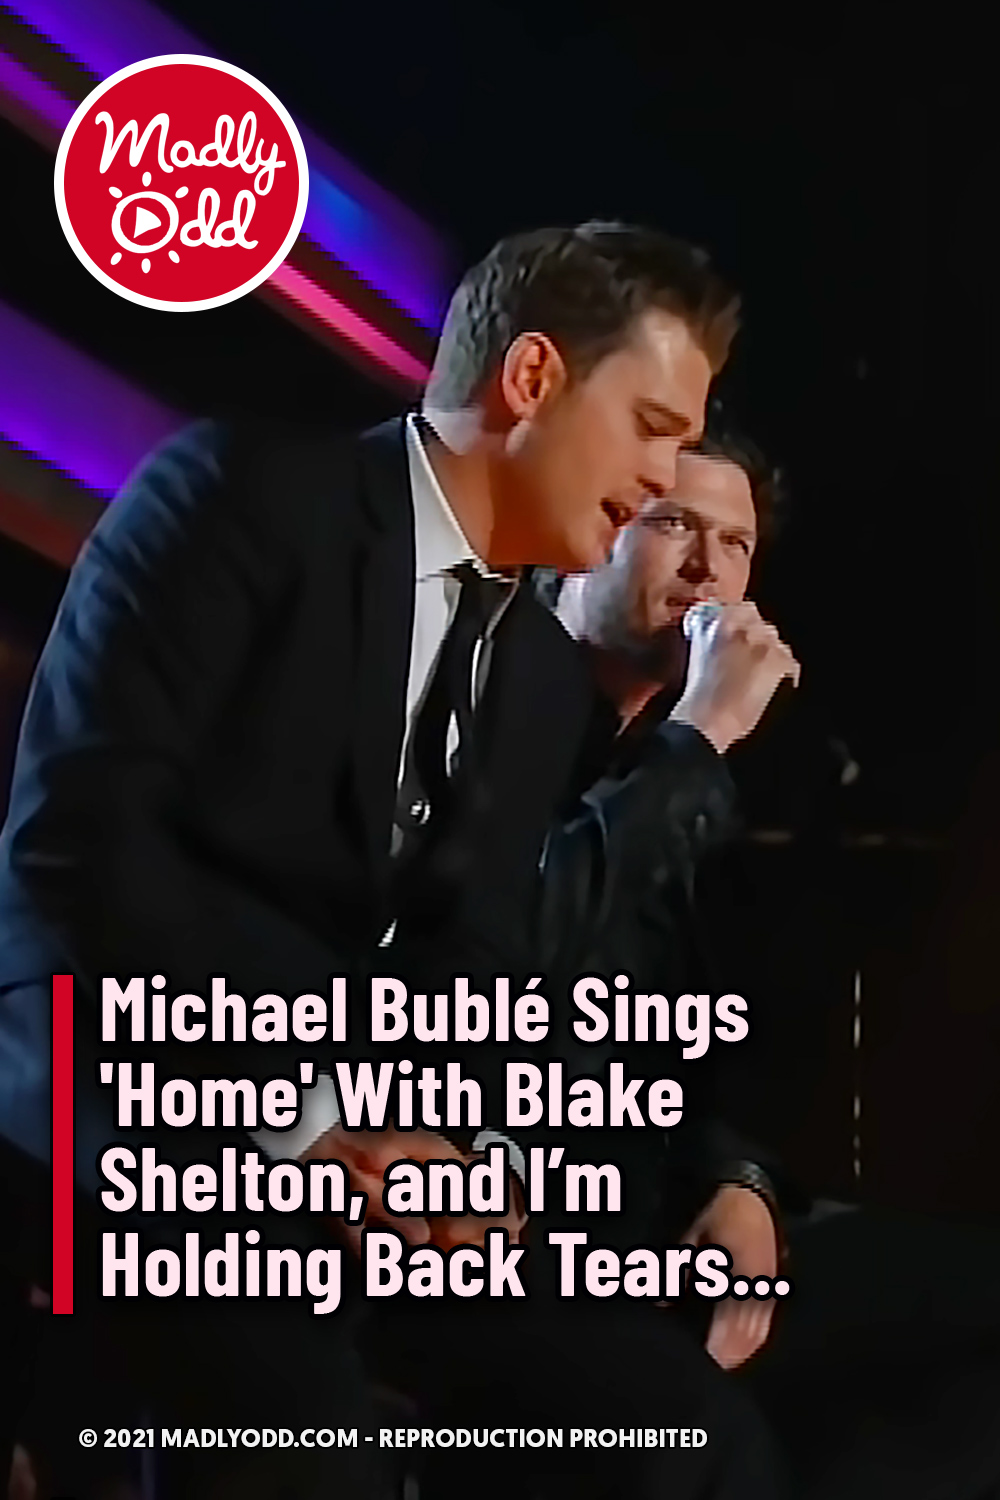 Michael Bublé Sings \'Home\' With Blake Shelton, and I’m Holding Back Tears...